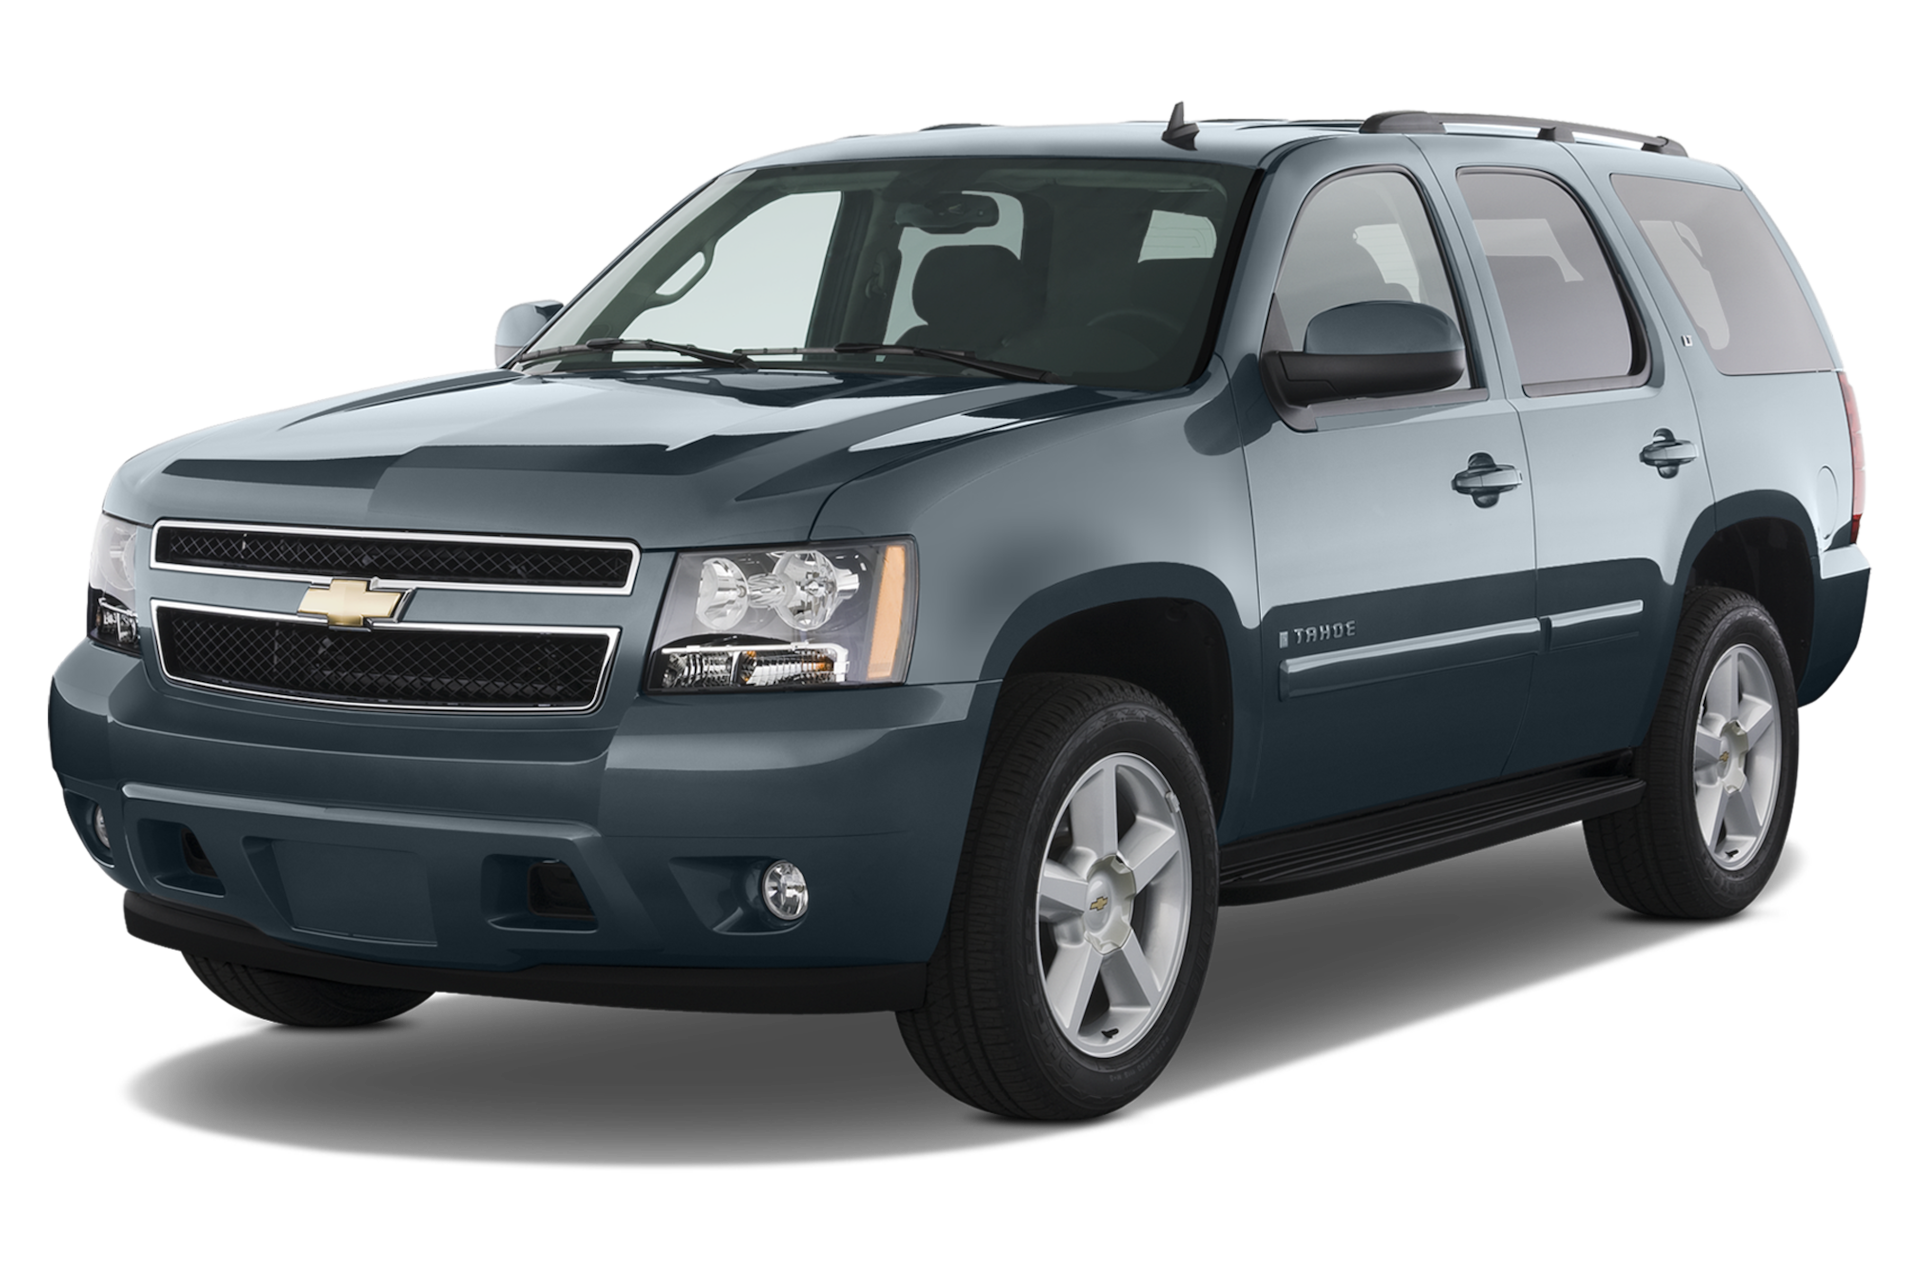 2011 Chevrolet Tahoe Prices, Reviews, and Photos - MotorTrend